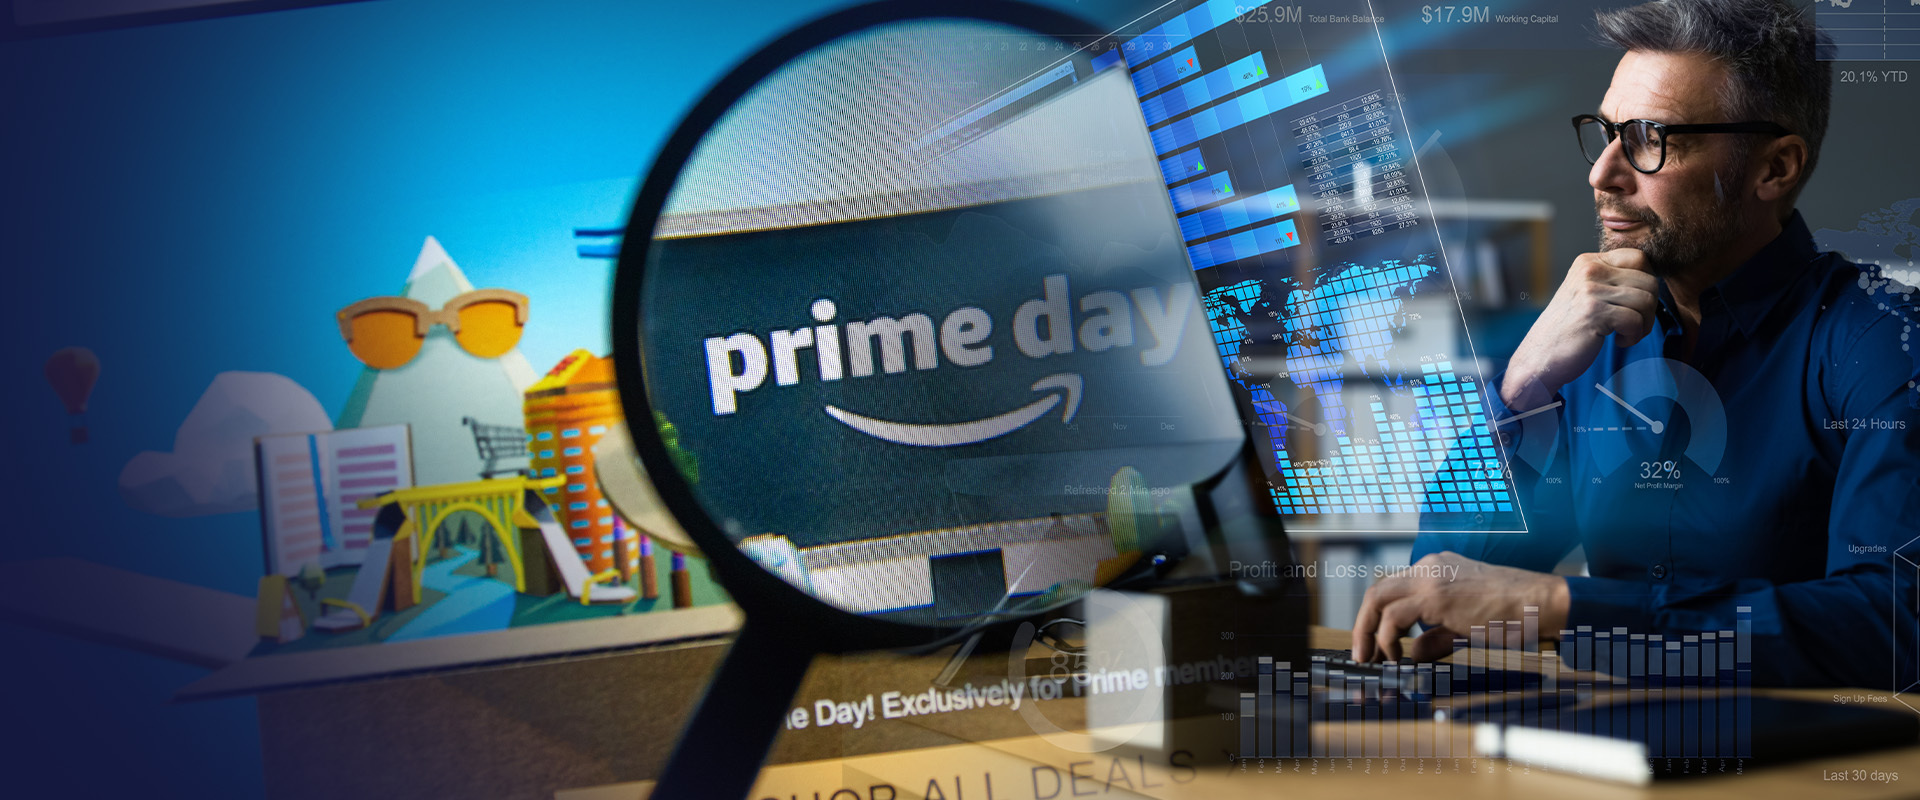 Which Amazon Sale Offered Better Deals: Prime Day in July or Big Deal Days in October?